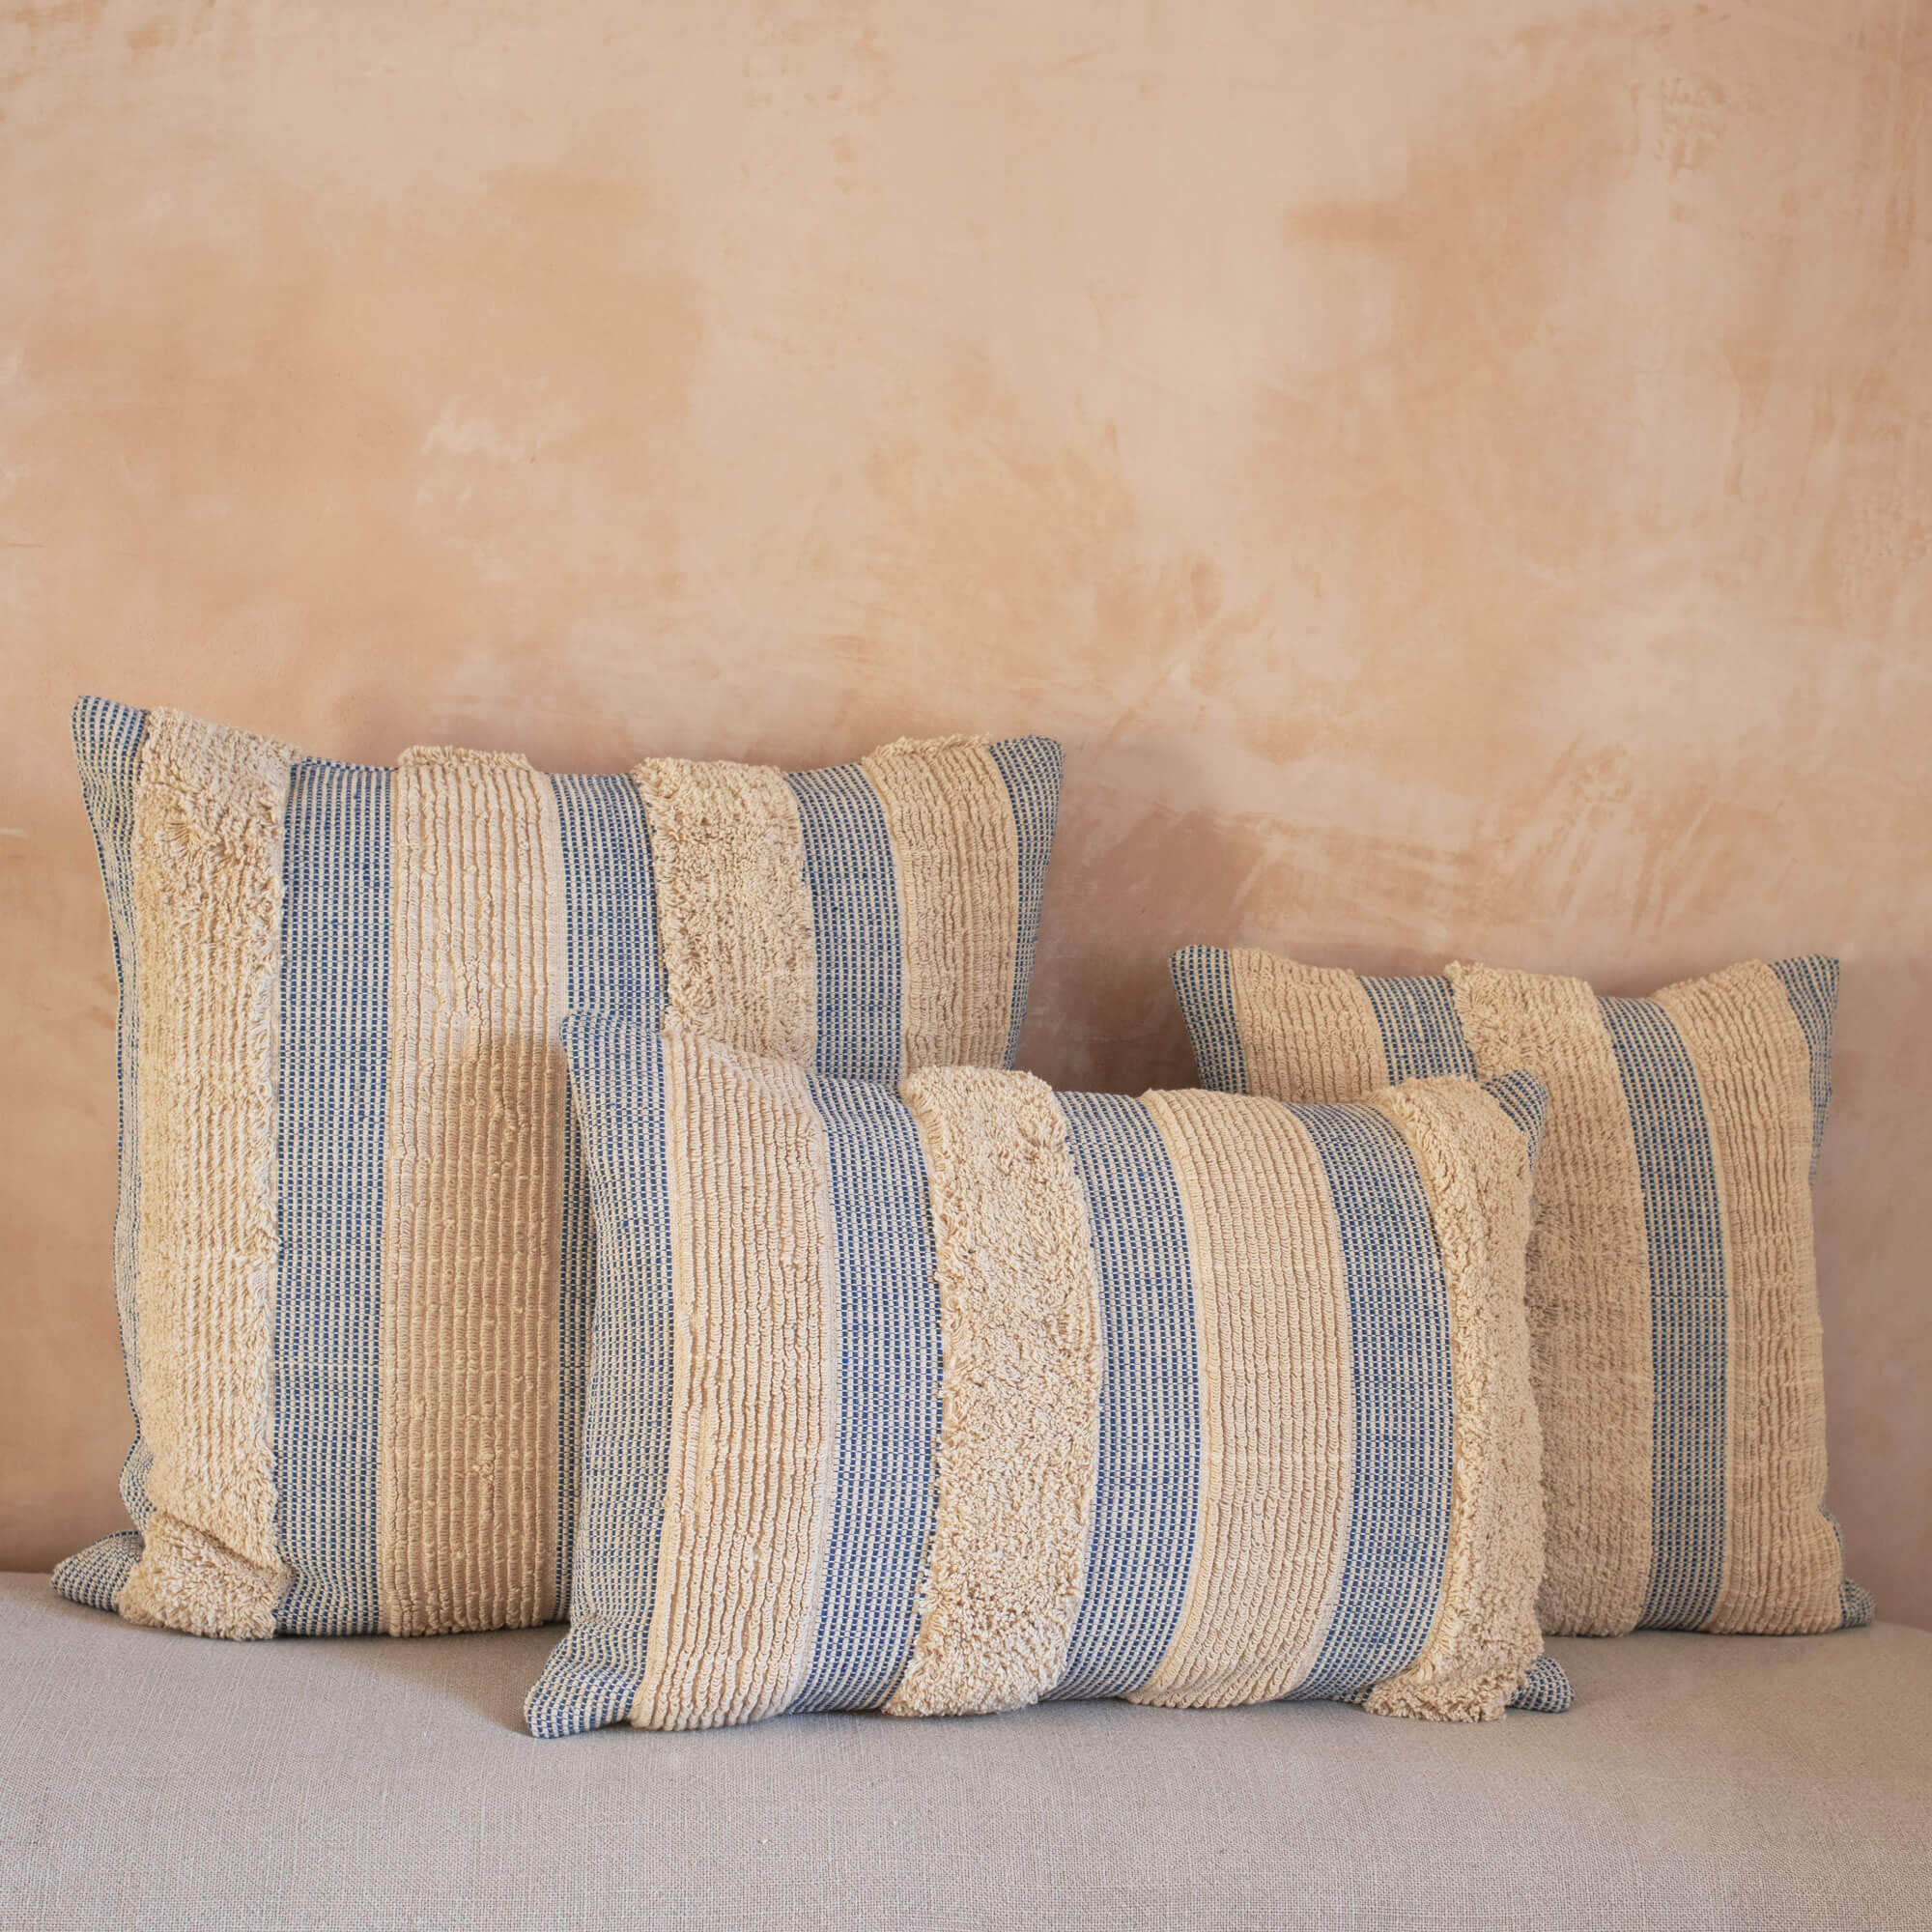 Read more about Graham and green misty large square blue and white striped cushion